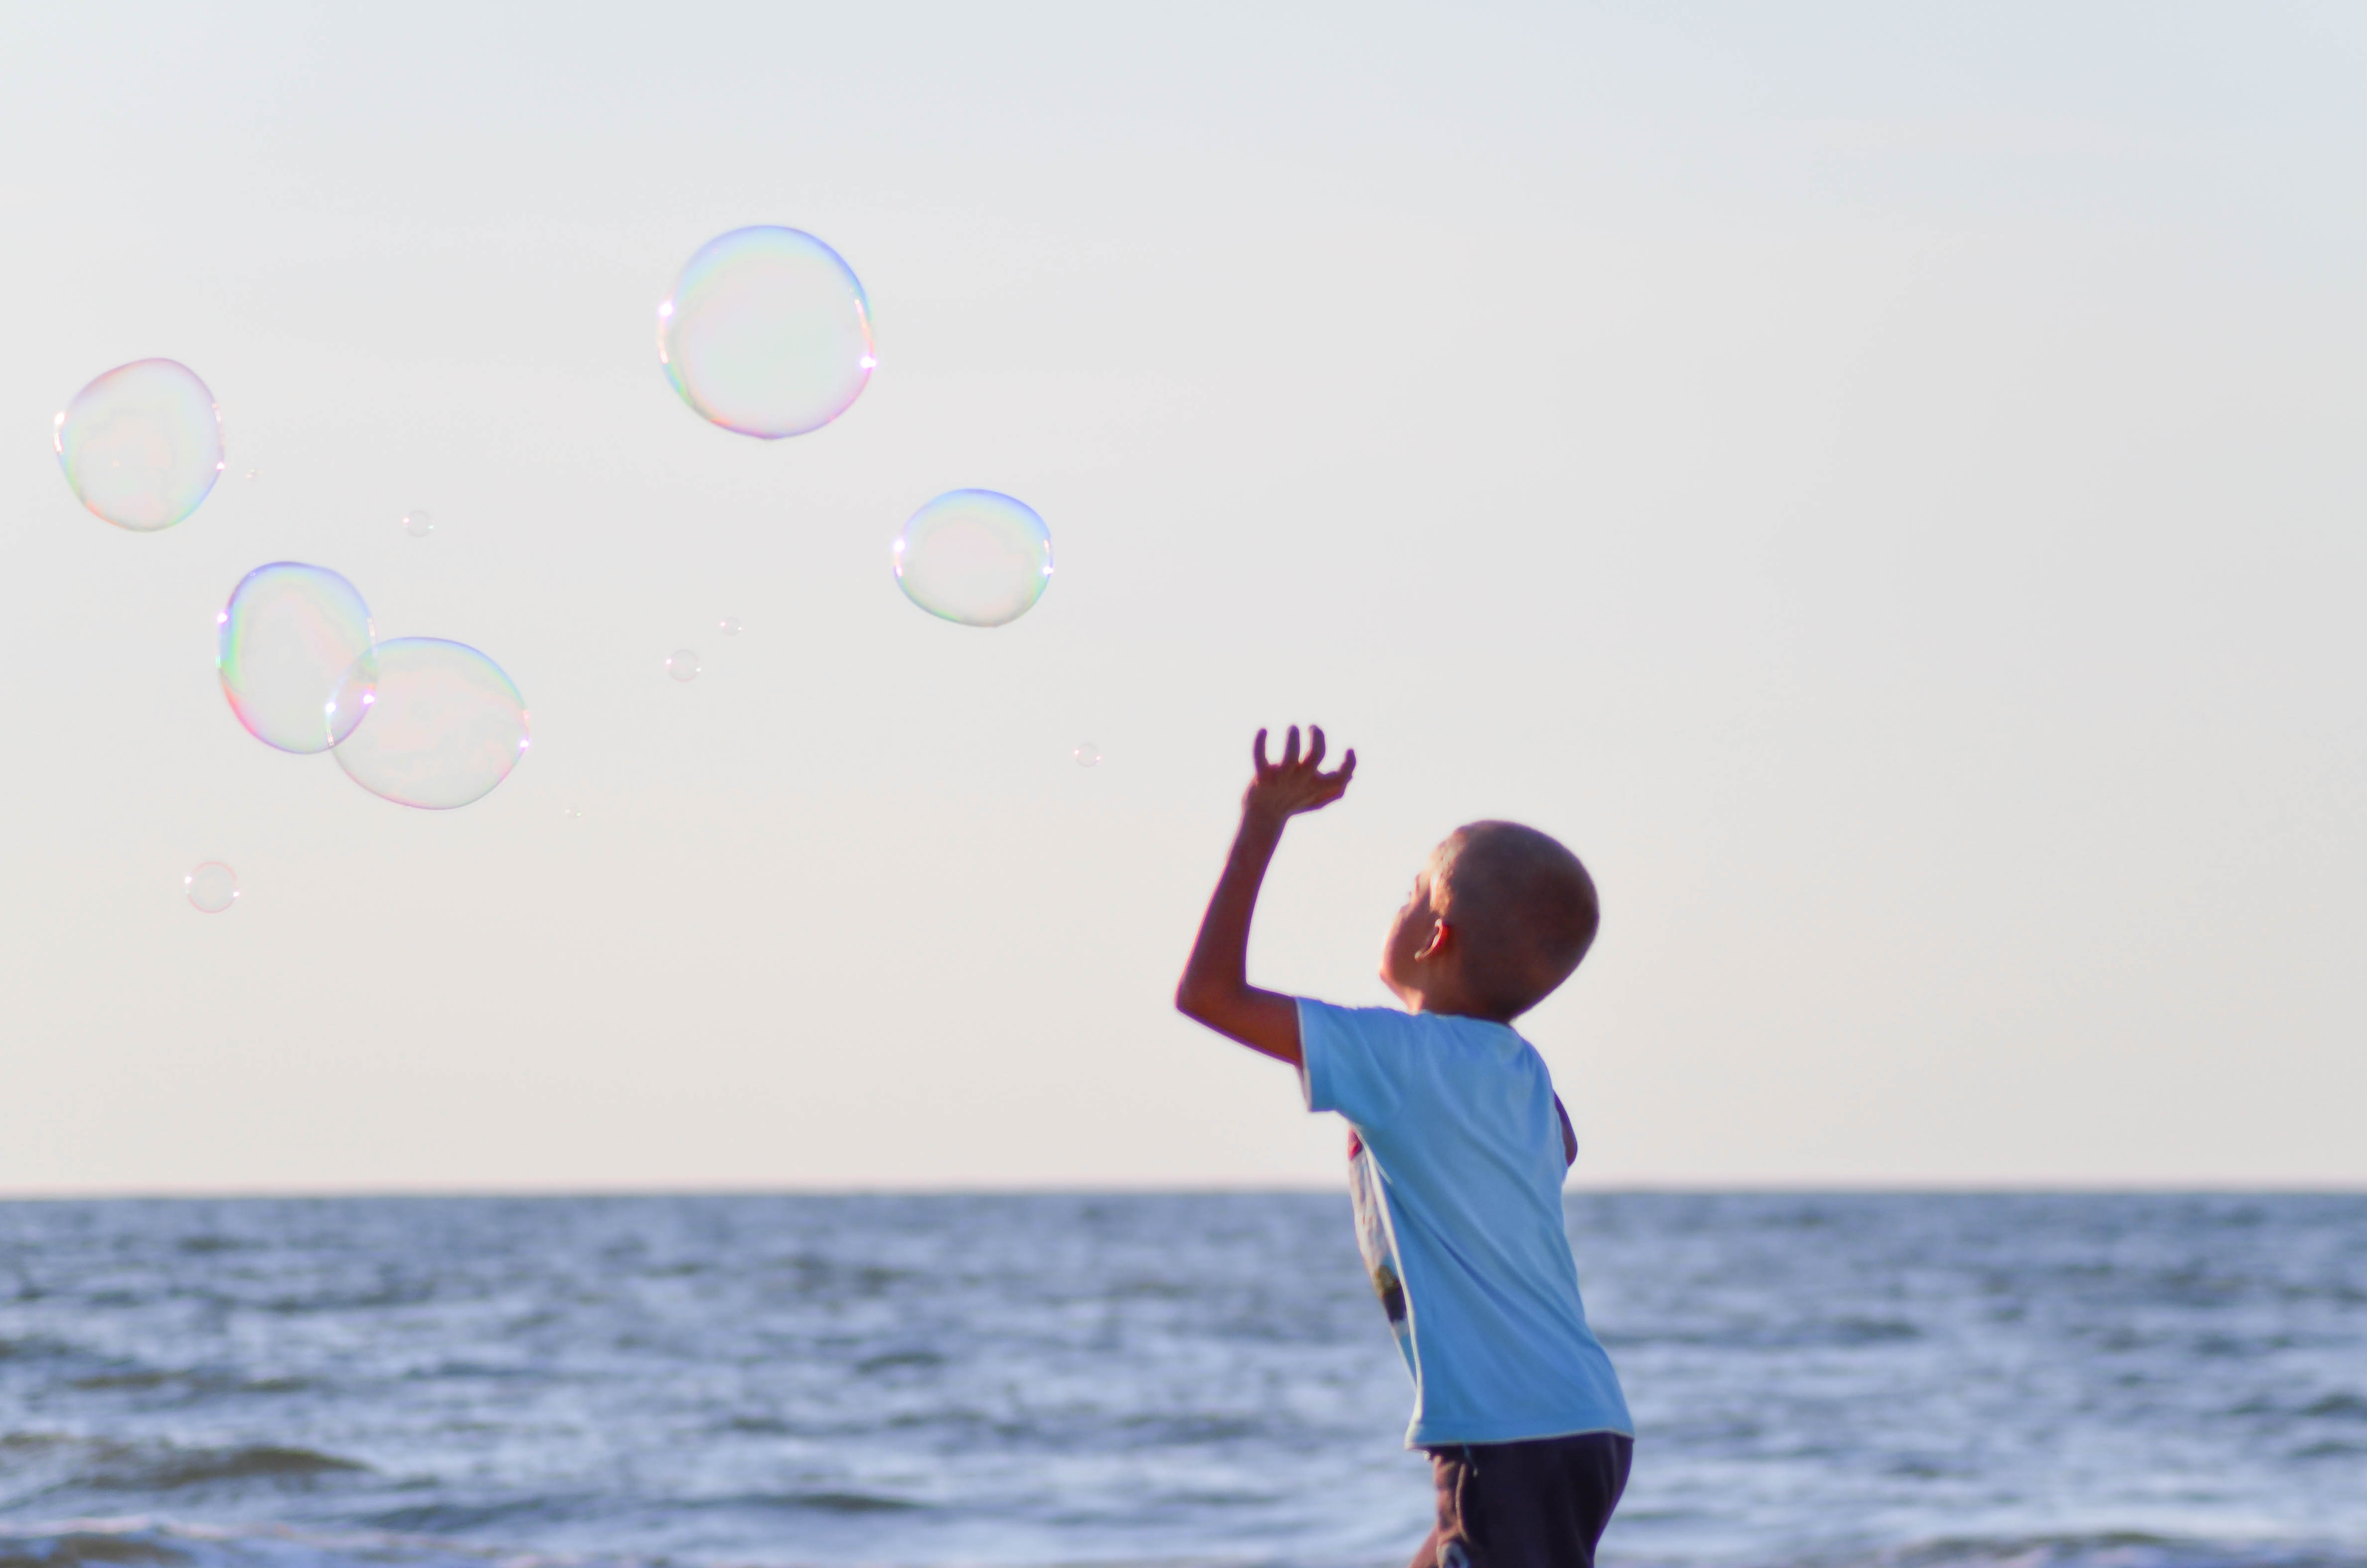 boy playing bubbles near body of water during daytime